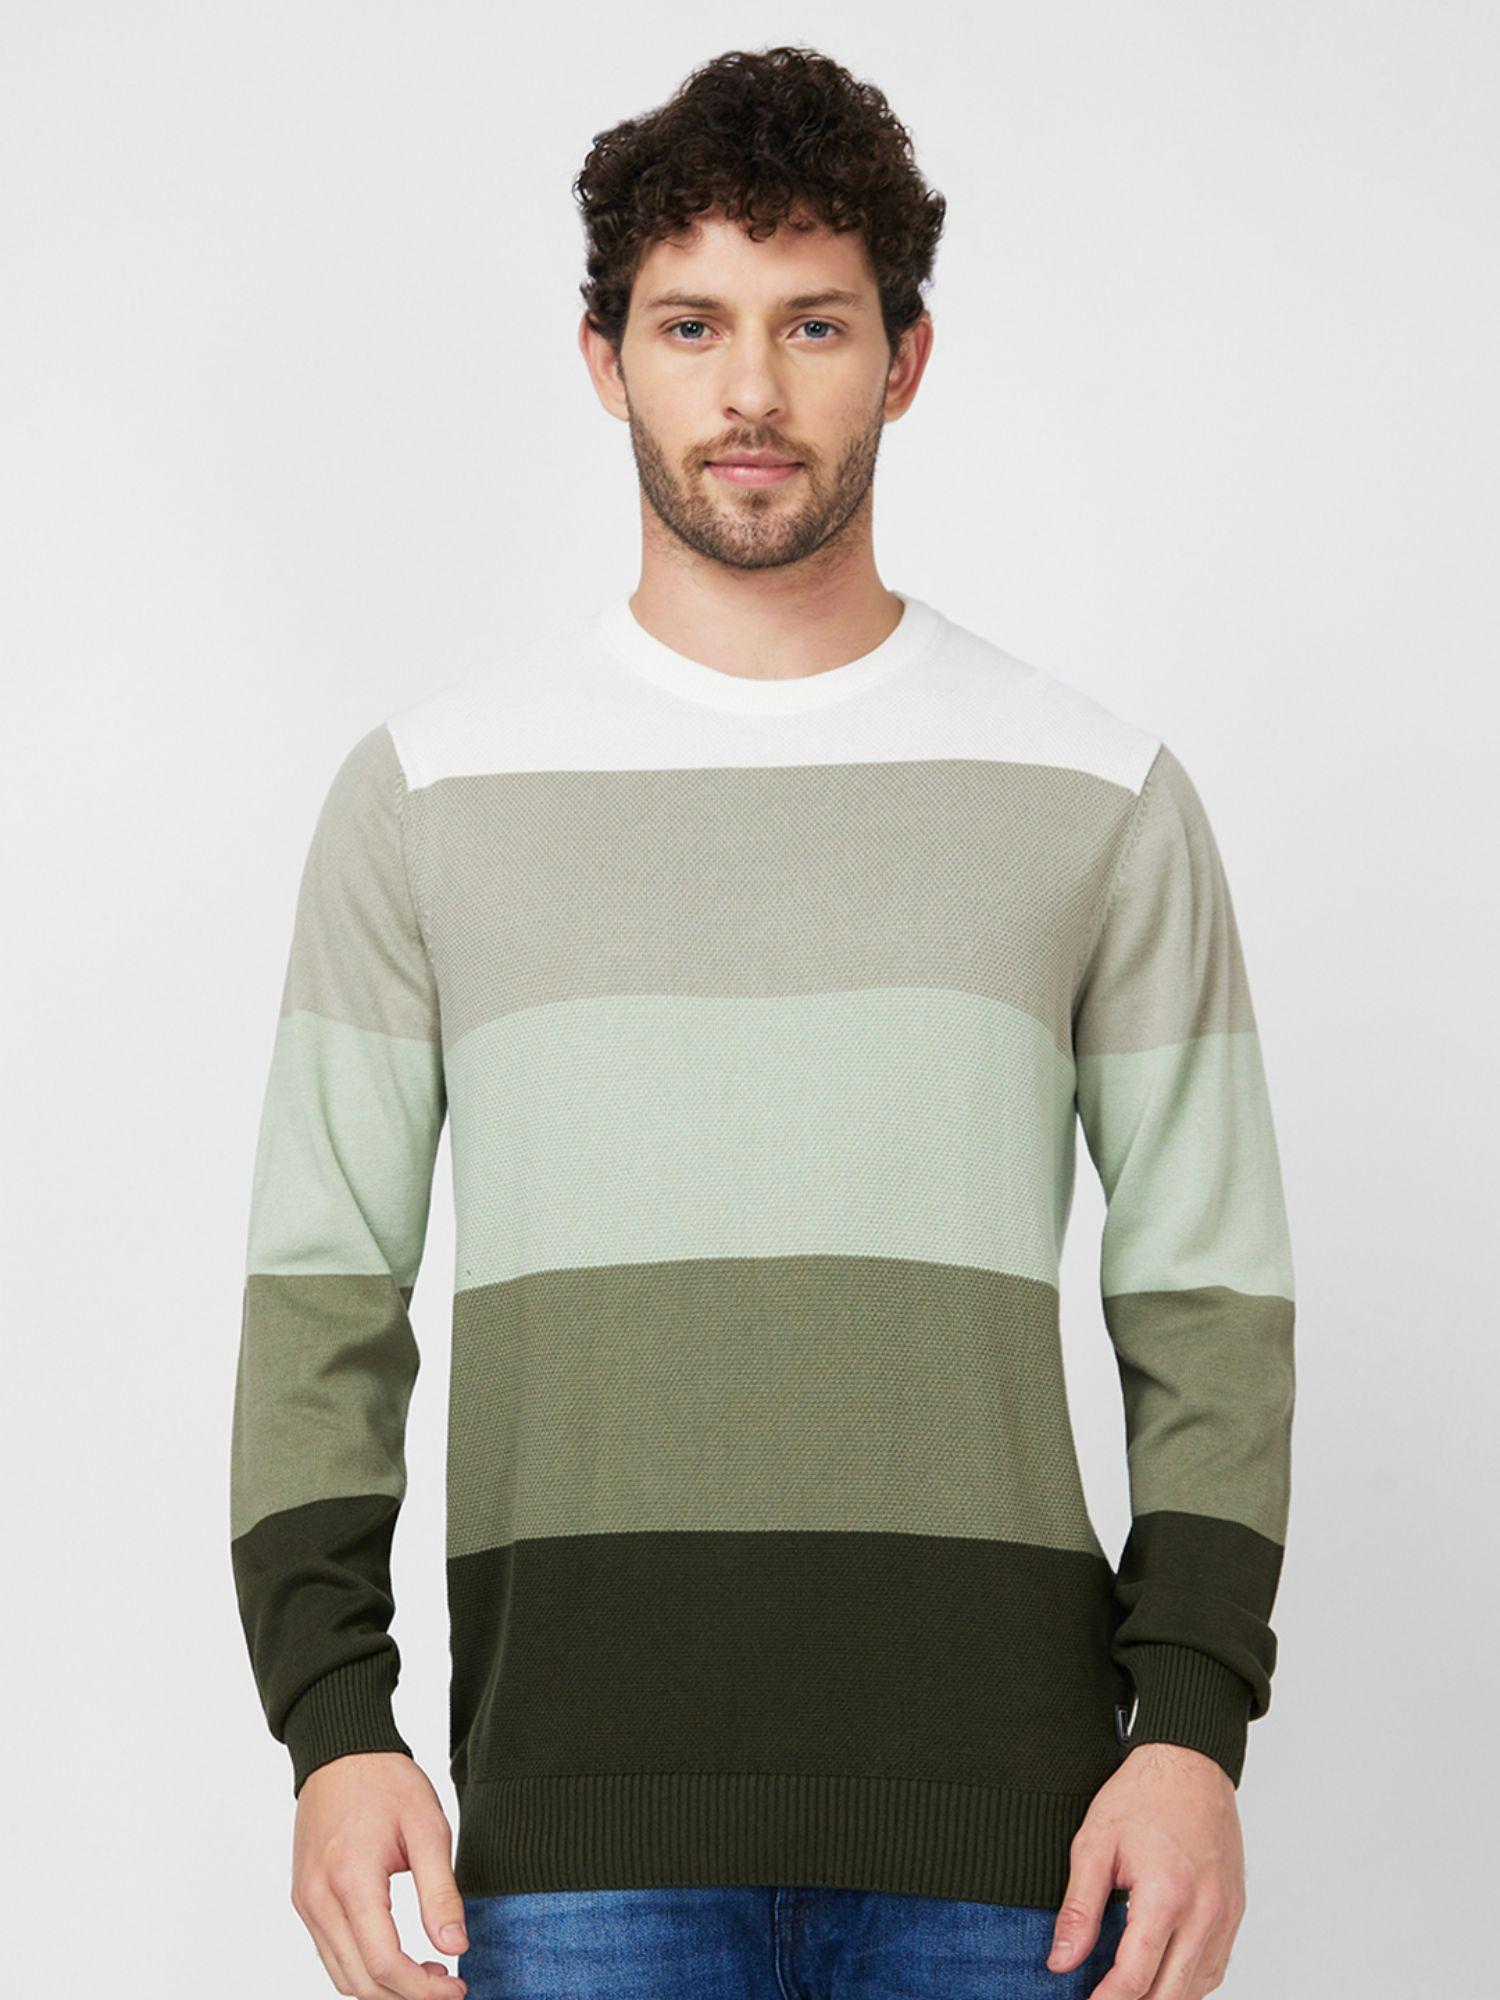 full-sleeve-round-neck-multi-color-cotton-sweater